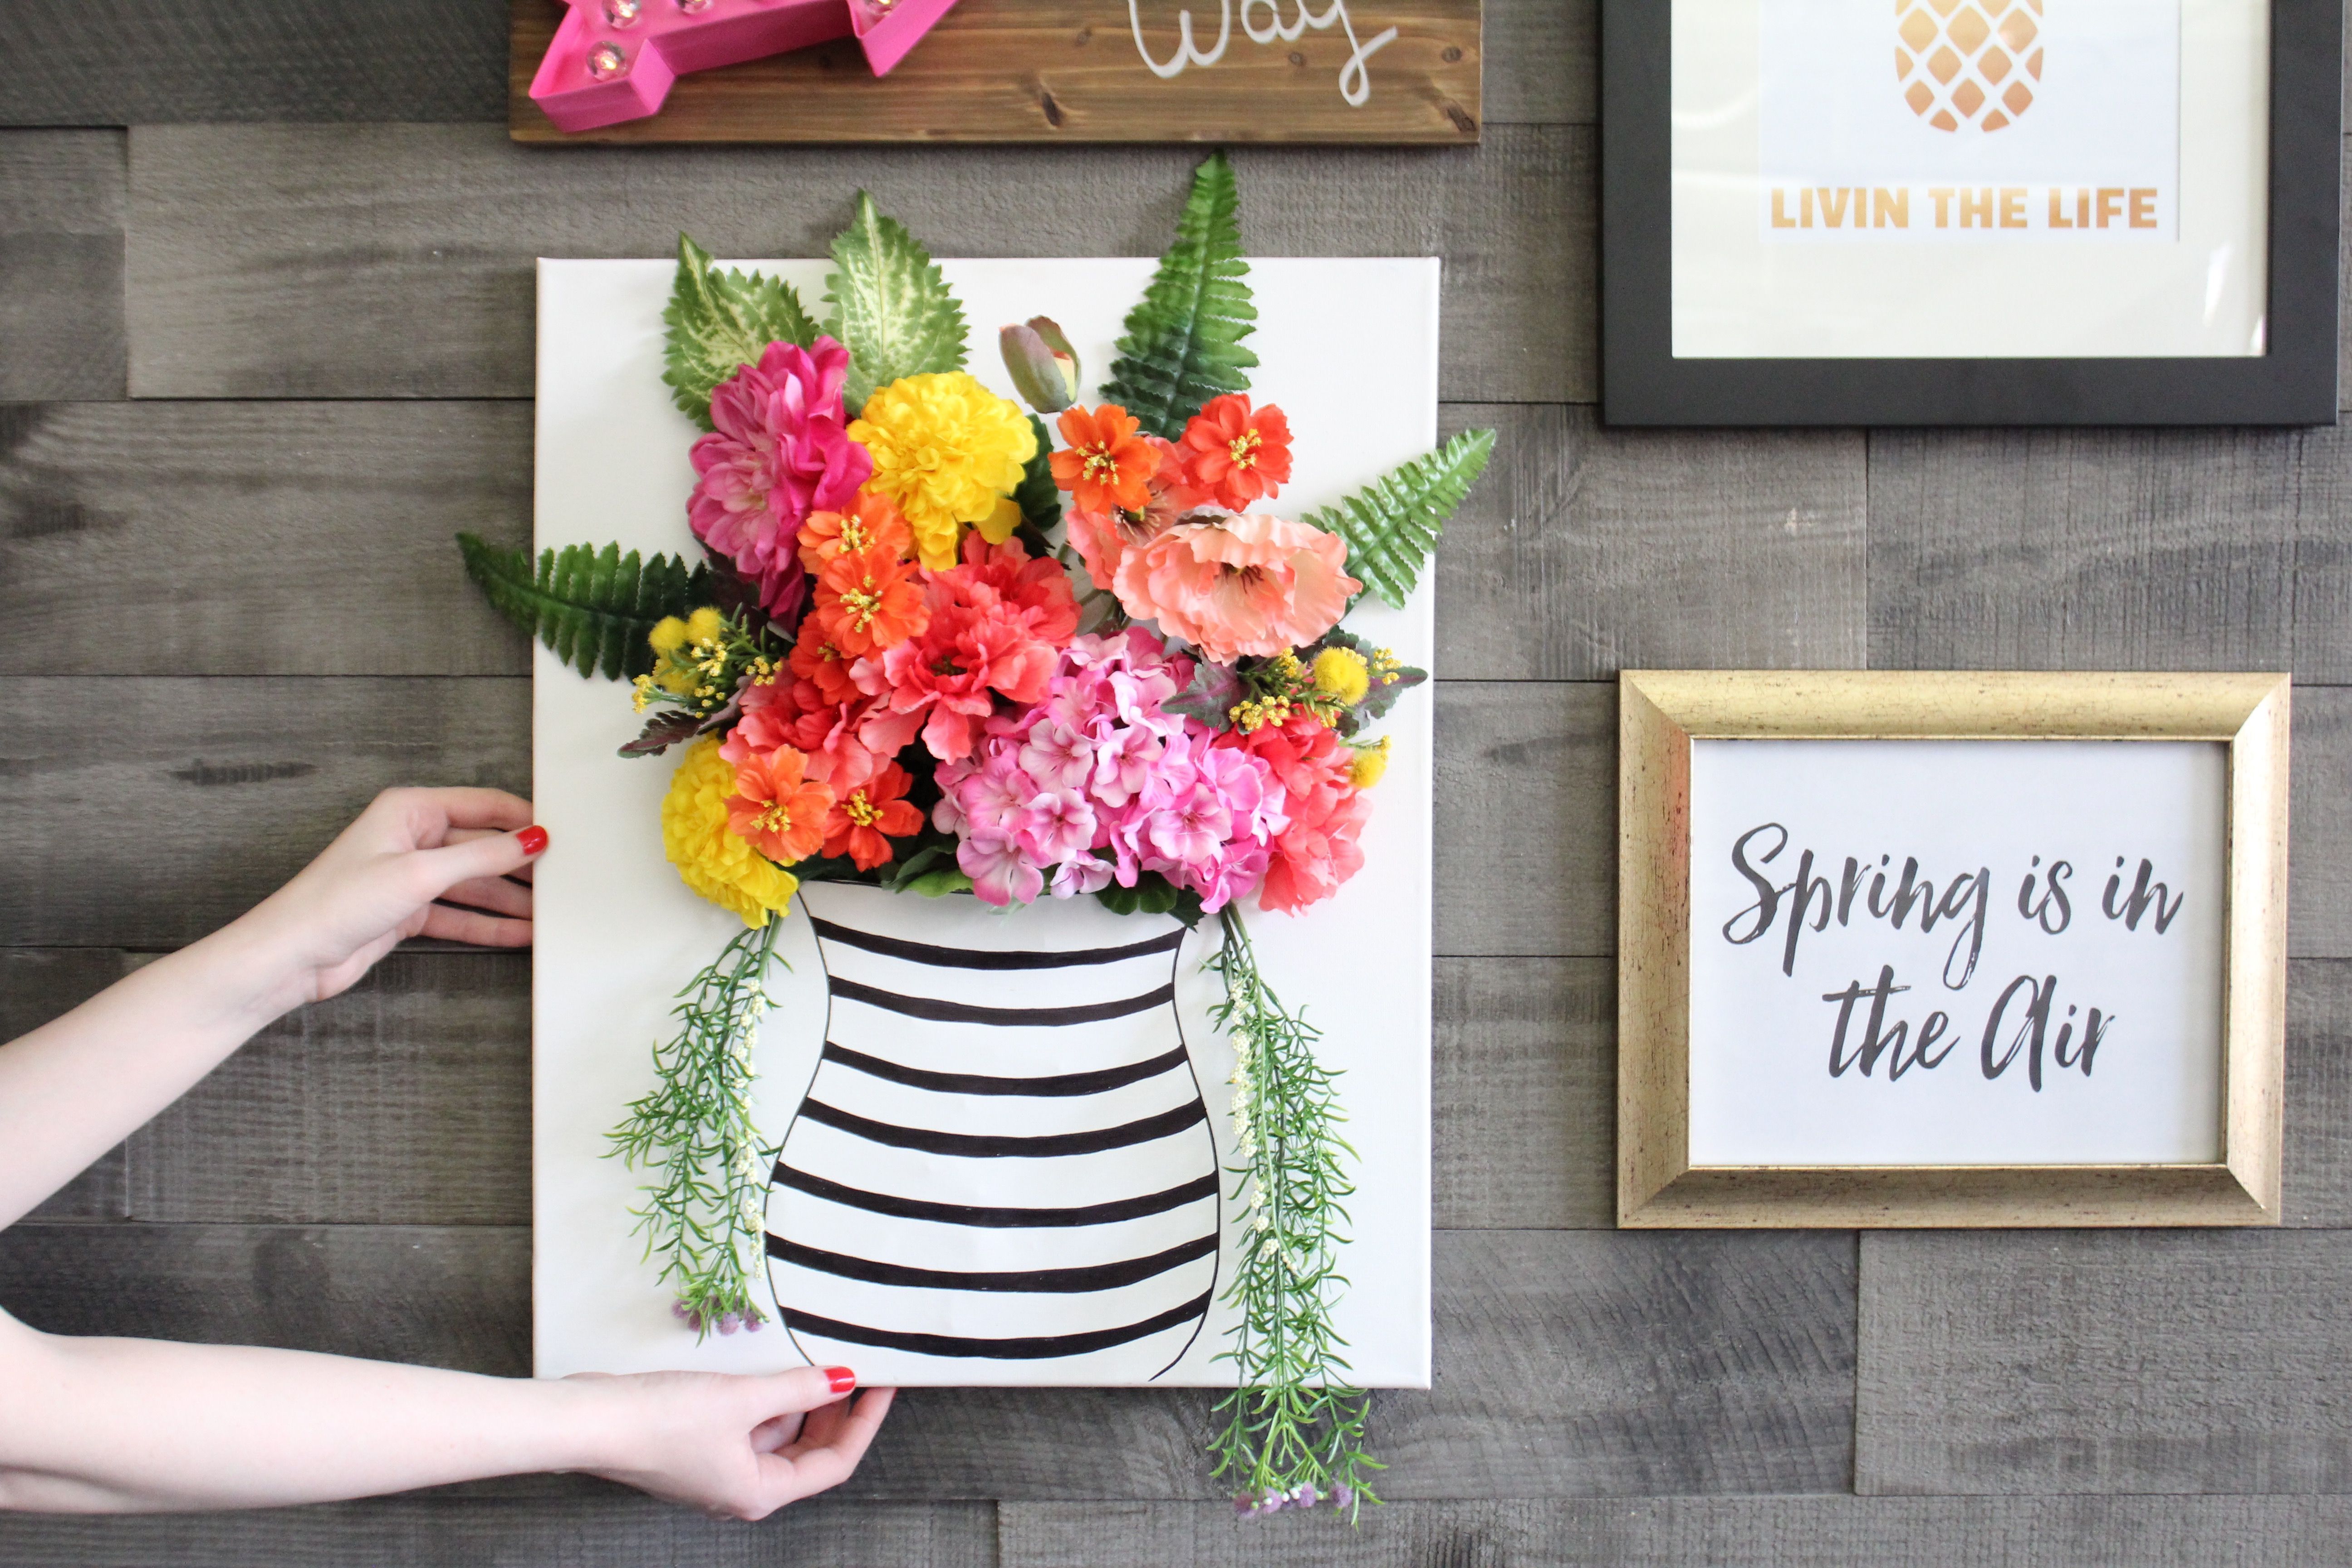 Make 3D Floral Art 3 Ways with these DIY ideas.